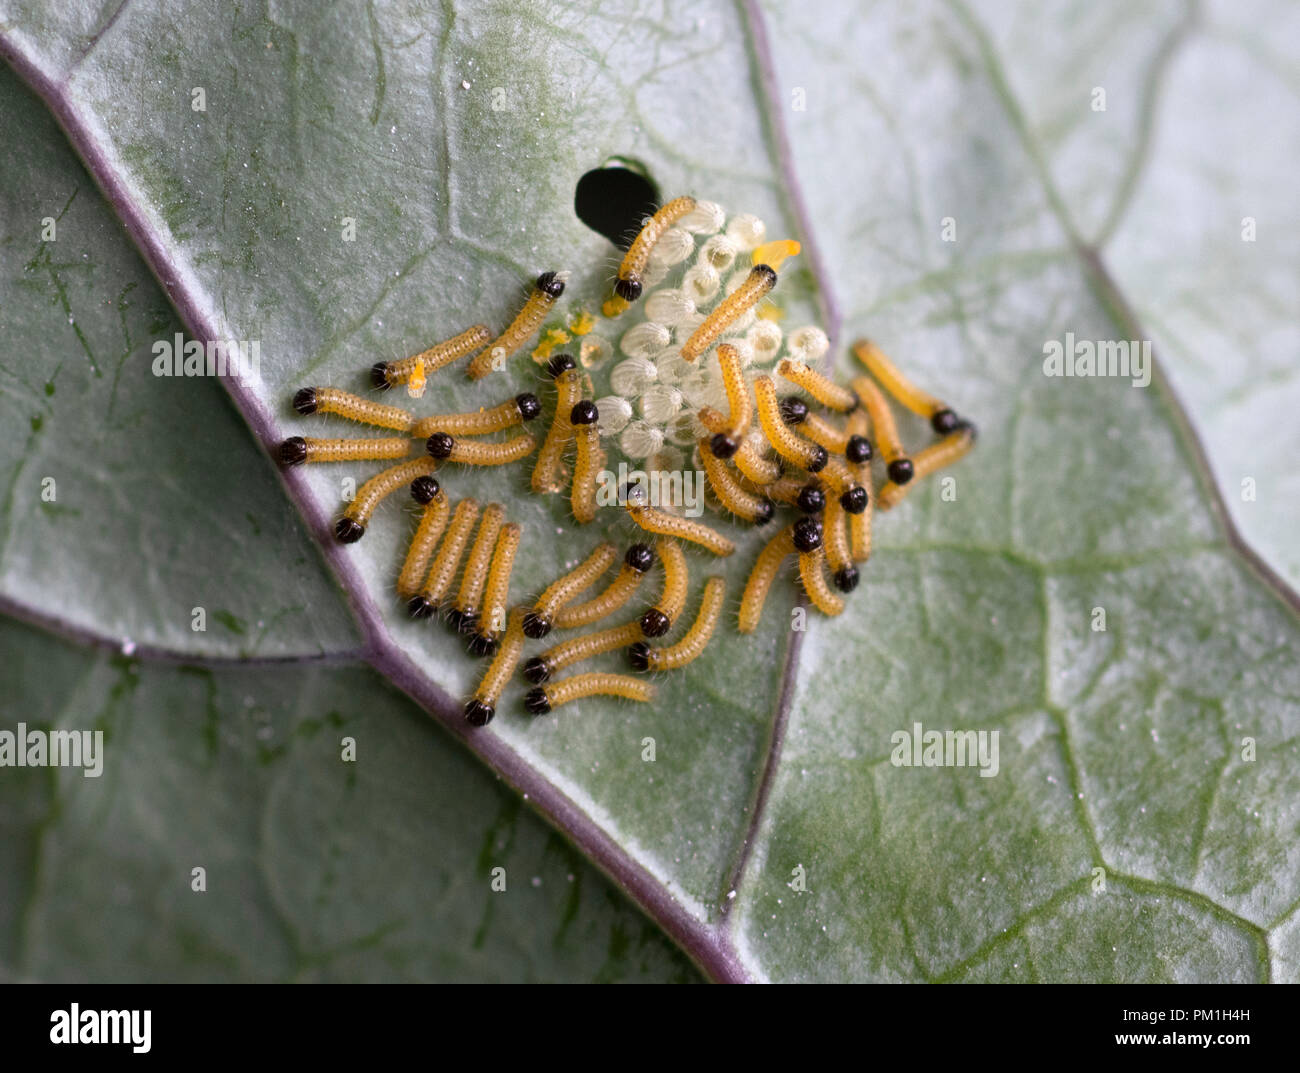 Newly hatched cabbage white butterfly caterpillars and eggs on the underside of a Kohlrabi leaf Stock Photo